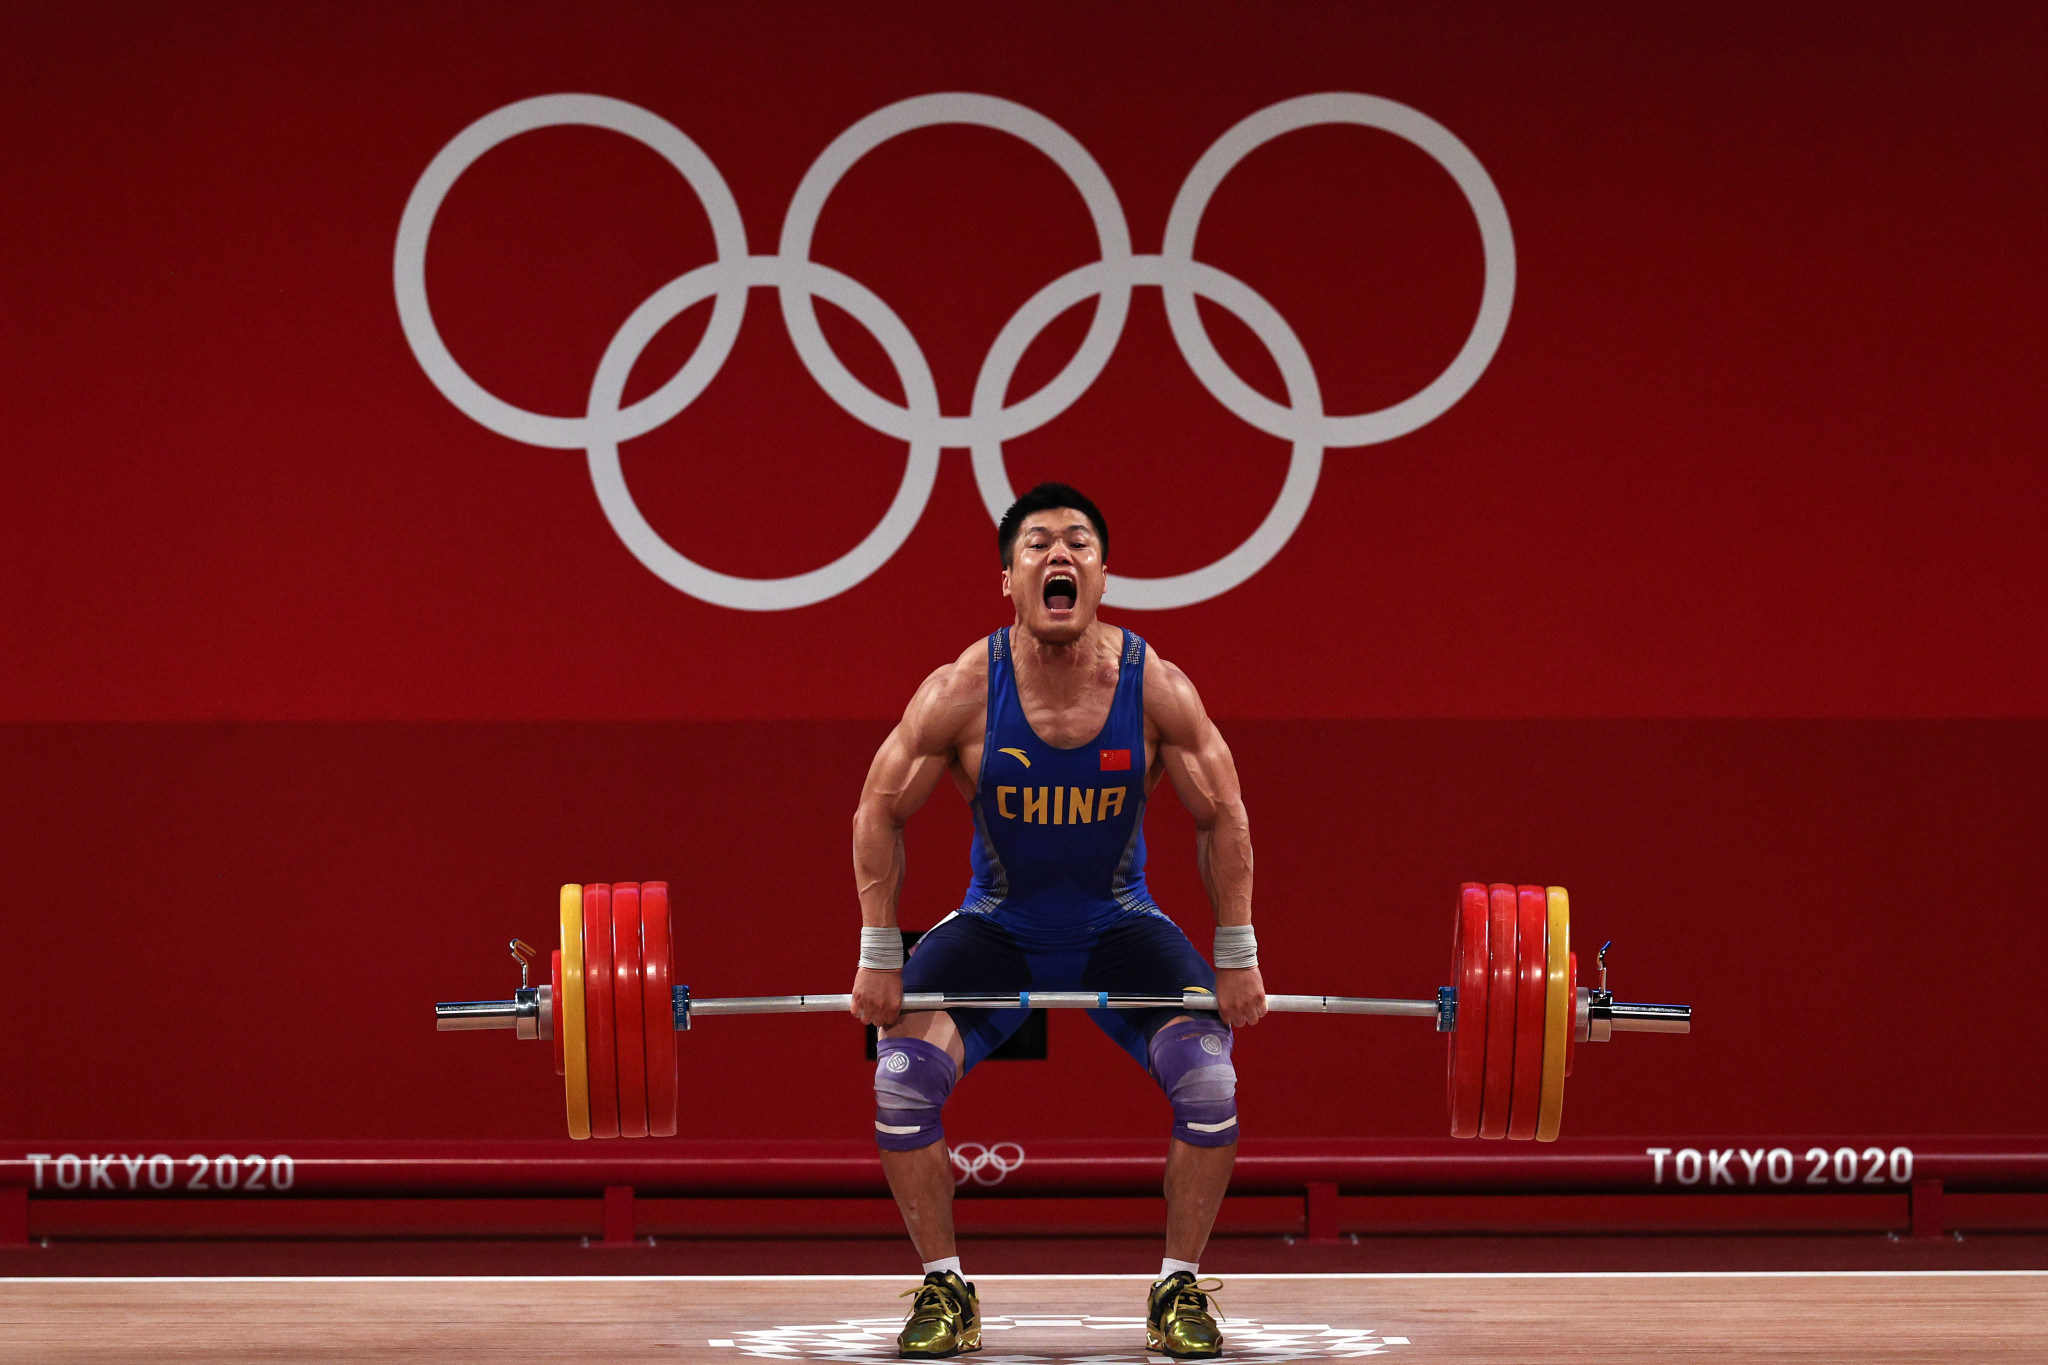 Lu Xiaojun of China, who won gold in the men's 81kg category at Tokyo 2020, will now become the first Asian weightlifter to win three Olympic gold medals ©Getty Images